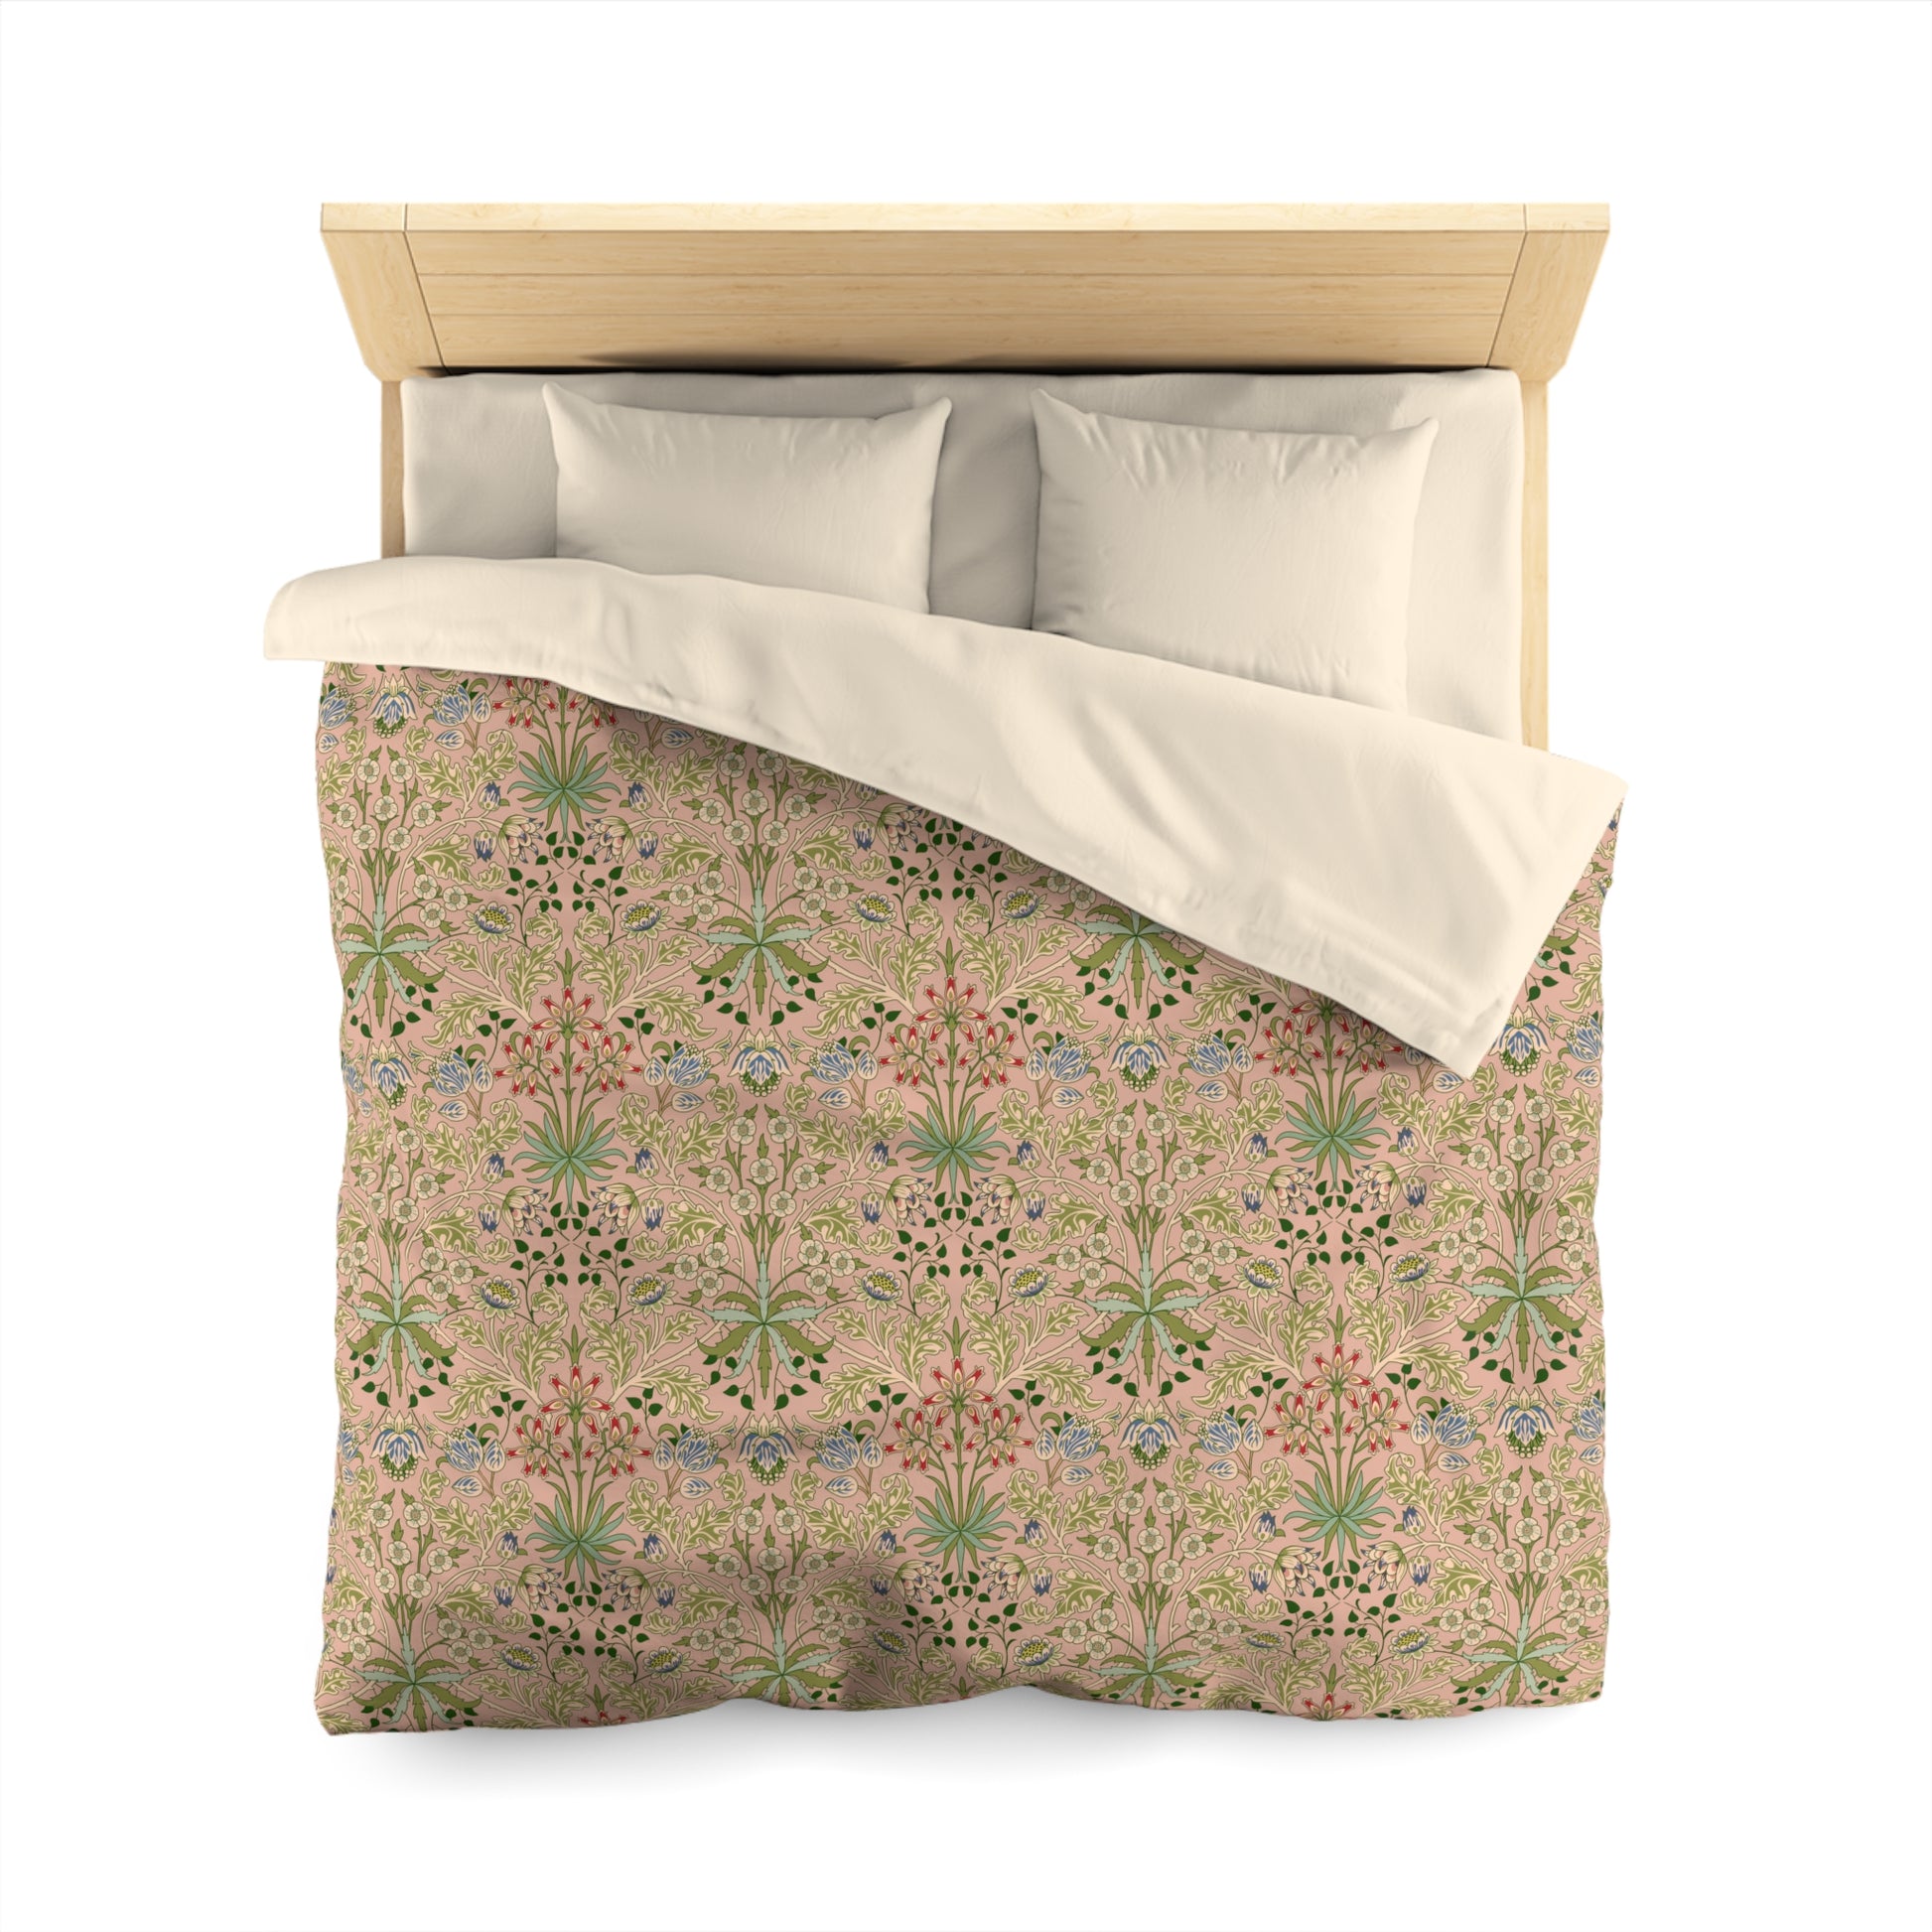 william-morris-co-duvet-cover-hyacinth-collection-blossom-7